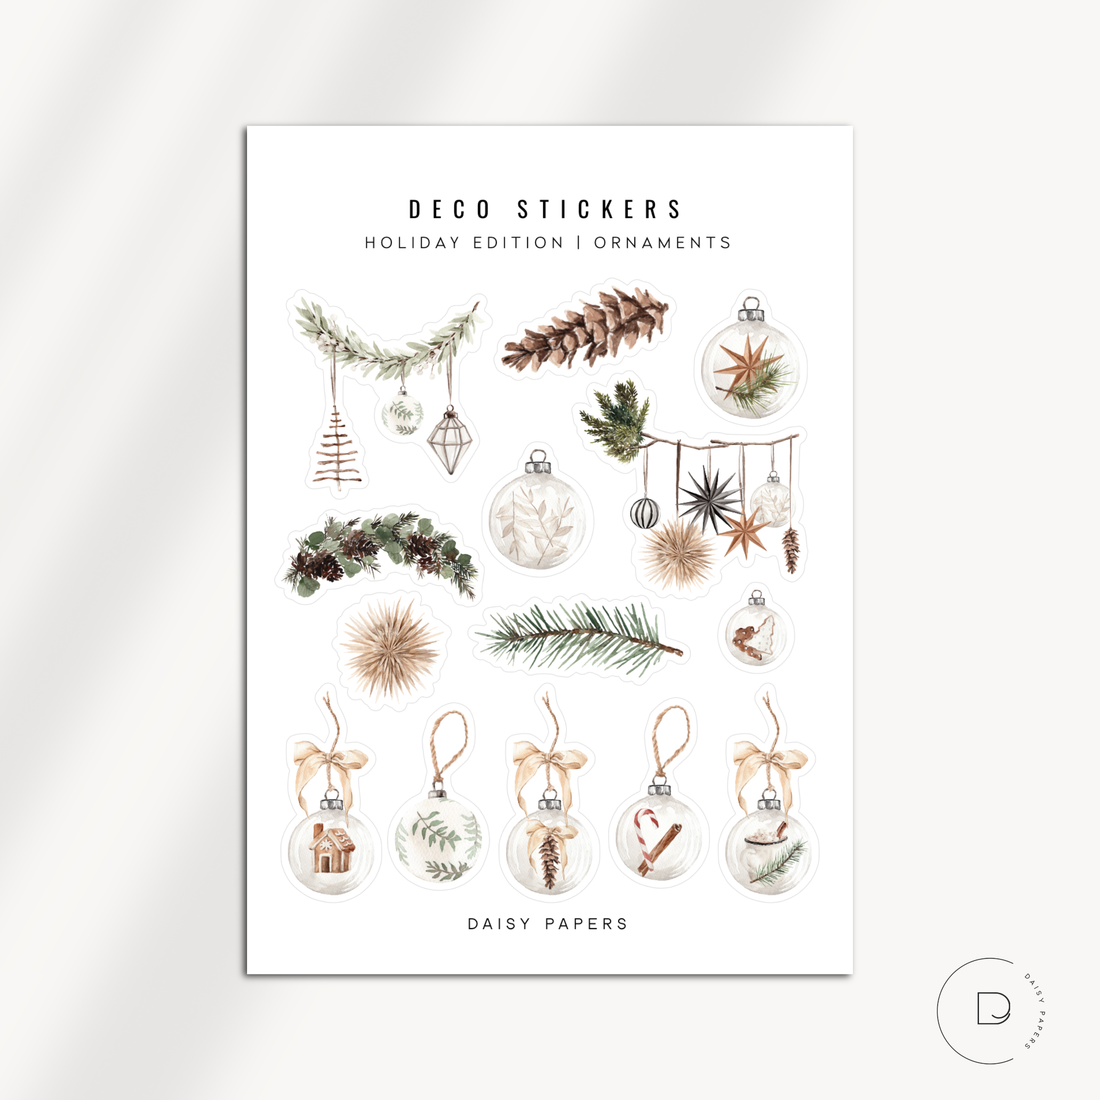 DECO STICKERS - HOLIDAY EDITION | ORNAMENTS